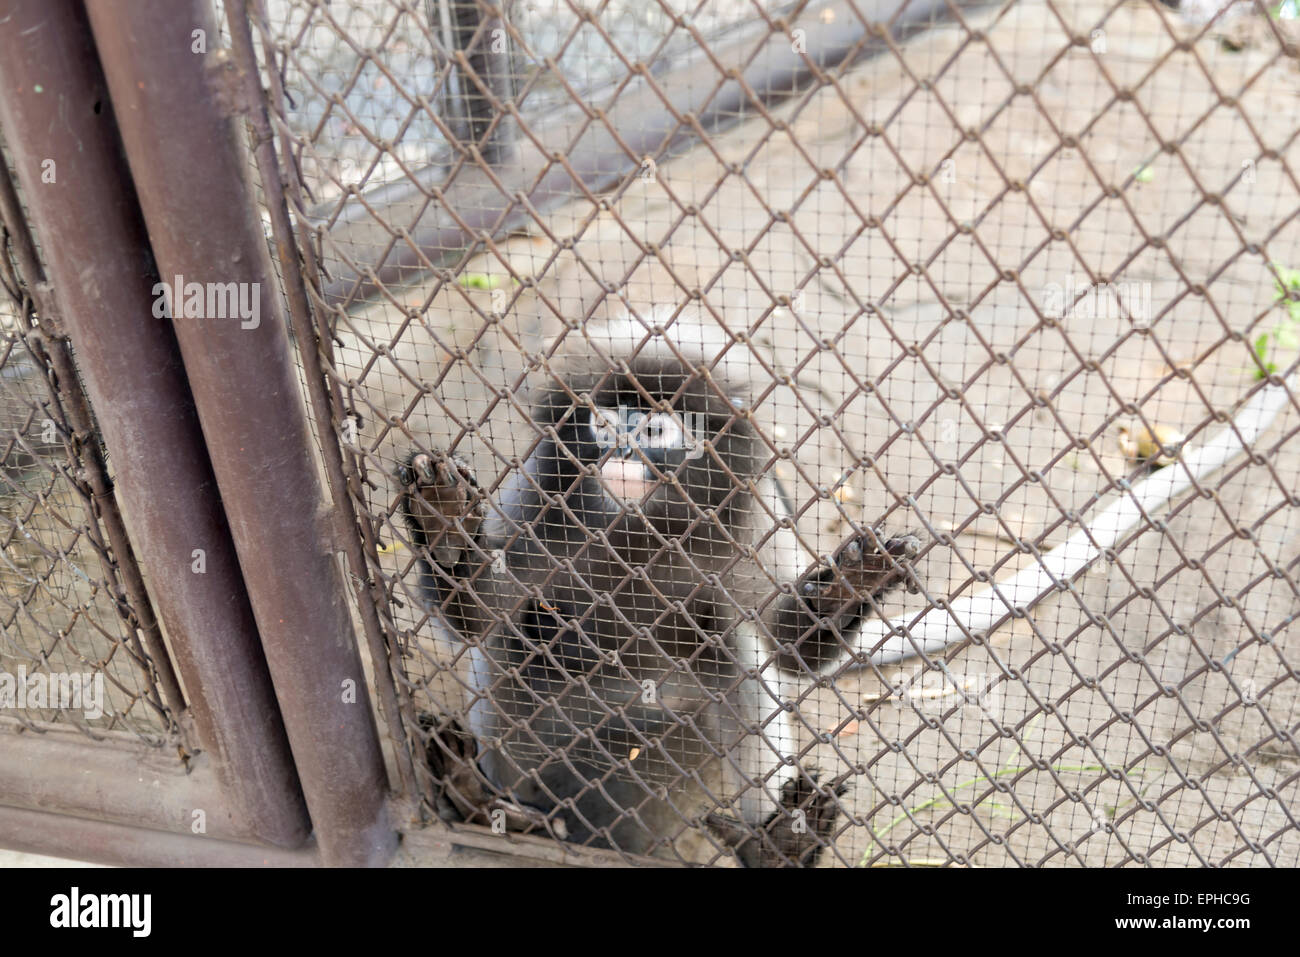 Leaf Monkey in cage in the zoo Stock Photo